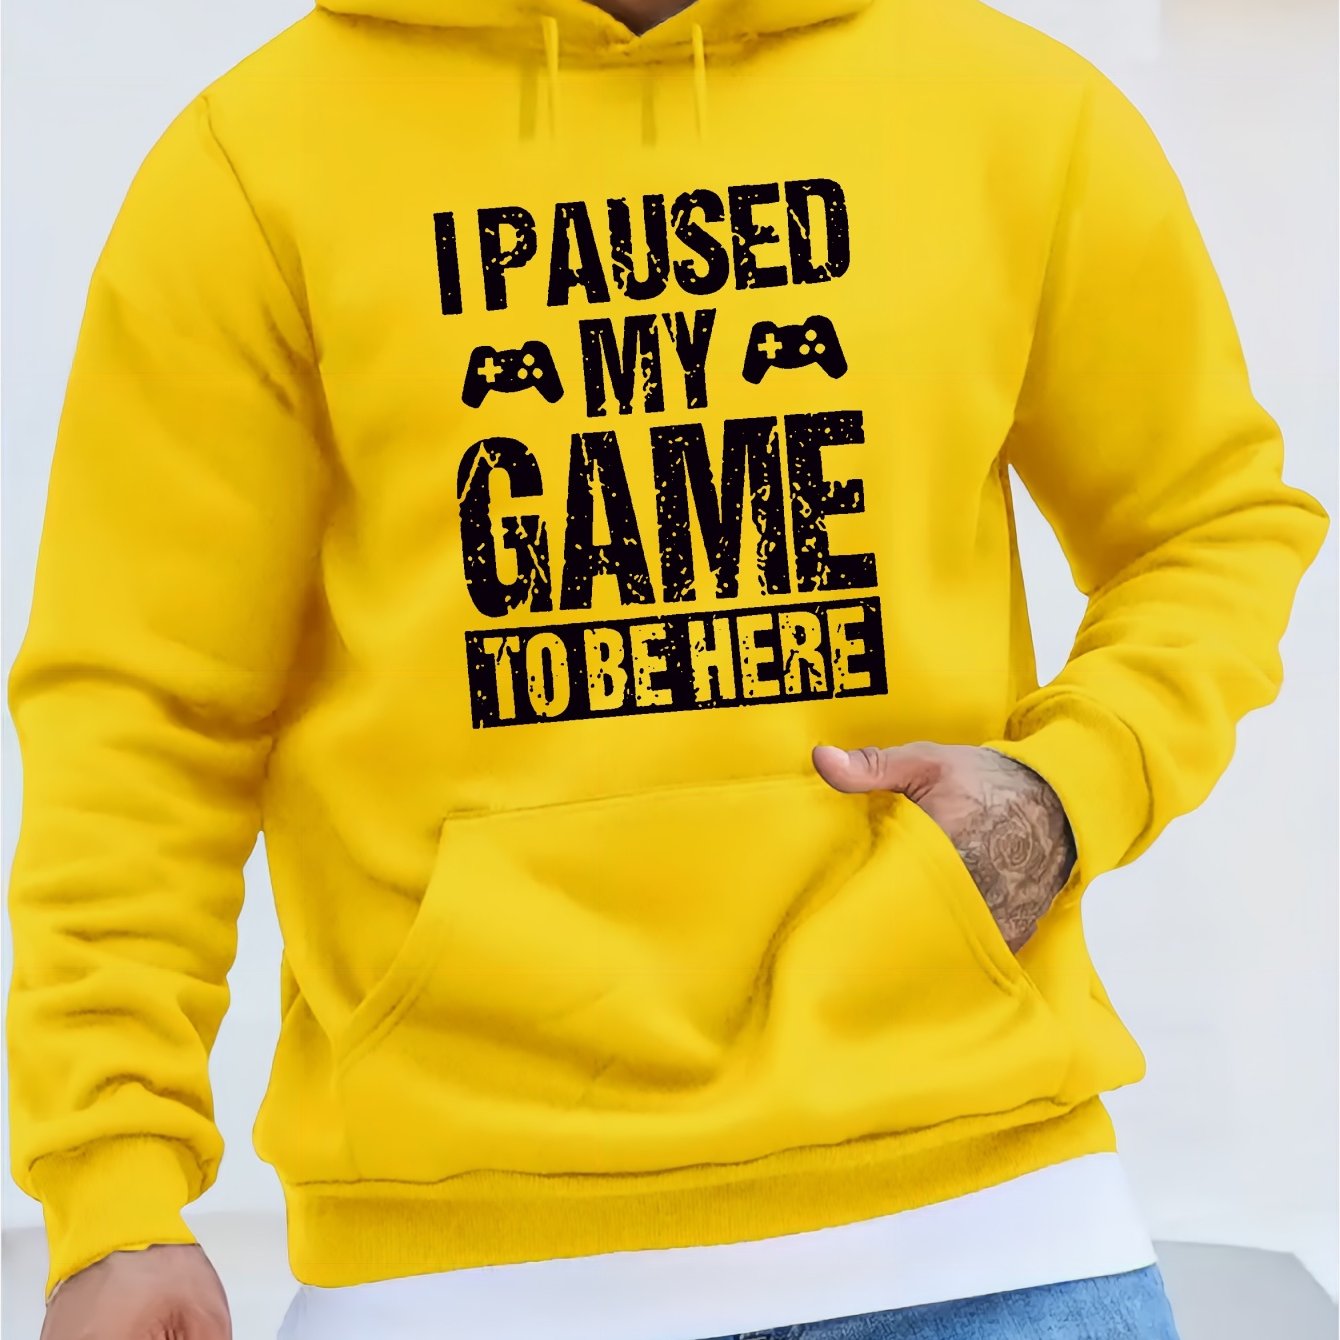 Funny I Paused My Game Print Hoodie, Cool Hoodies For Men, Men's Casual Graphic Design Pullover Hooded Sweatshirt With Kangaroo Pocket Streetwear For Winter Fall, As Gifts